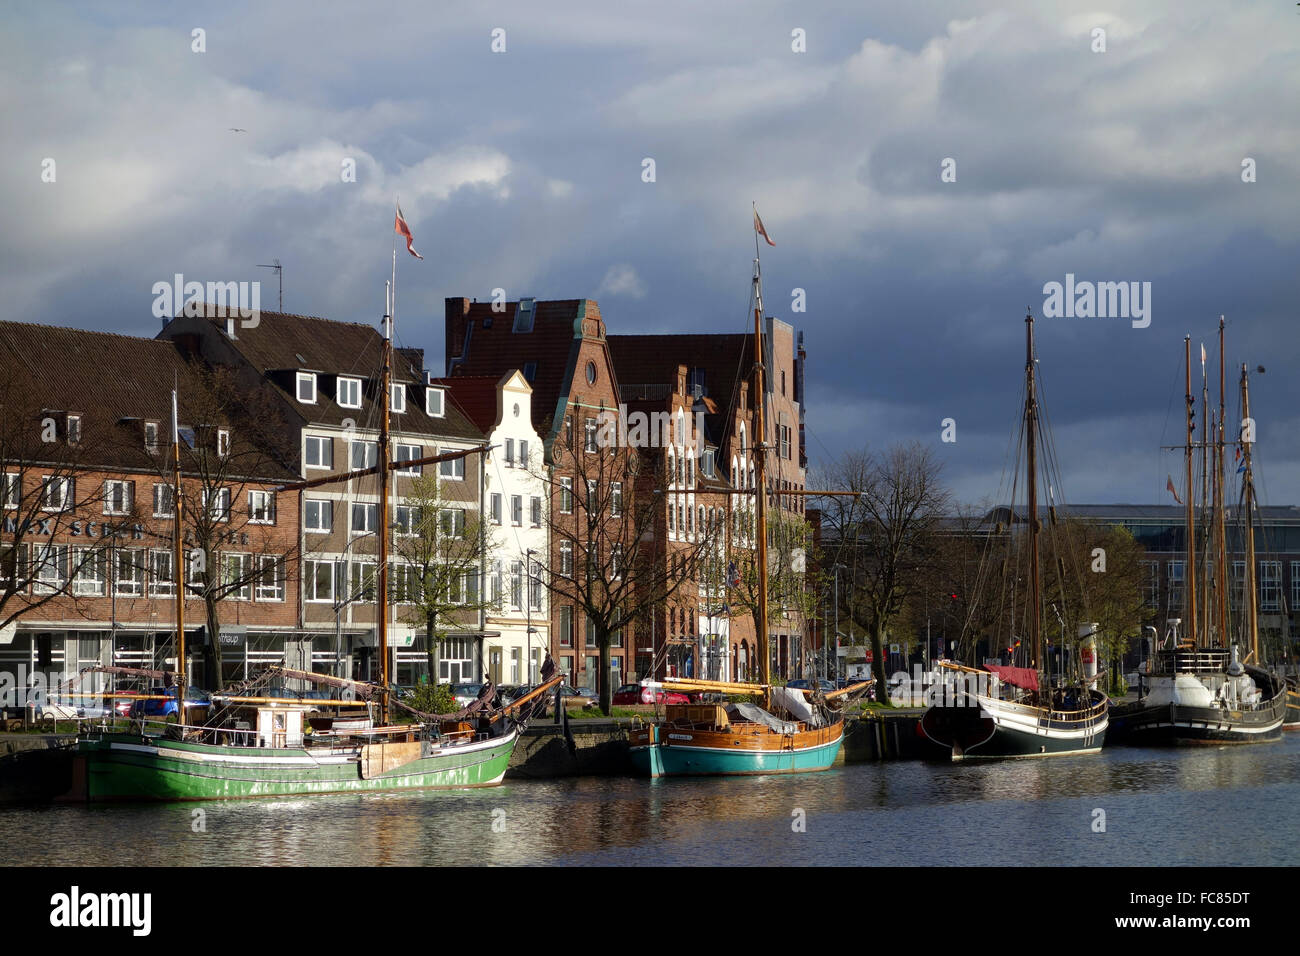 luebeck, old city, trave, germany Stock Photo